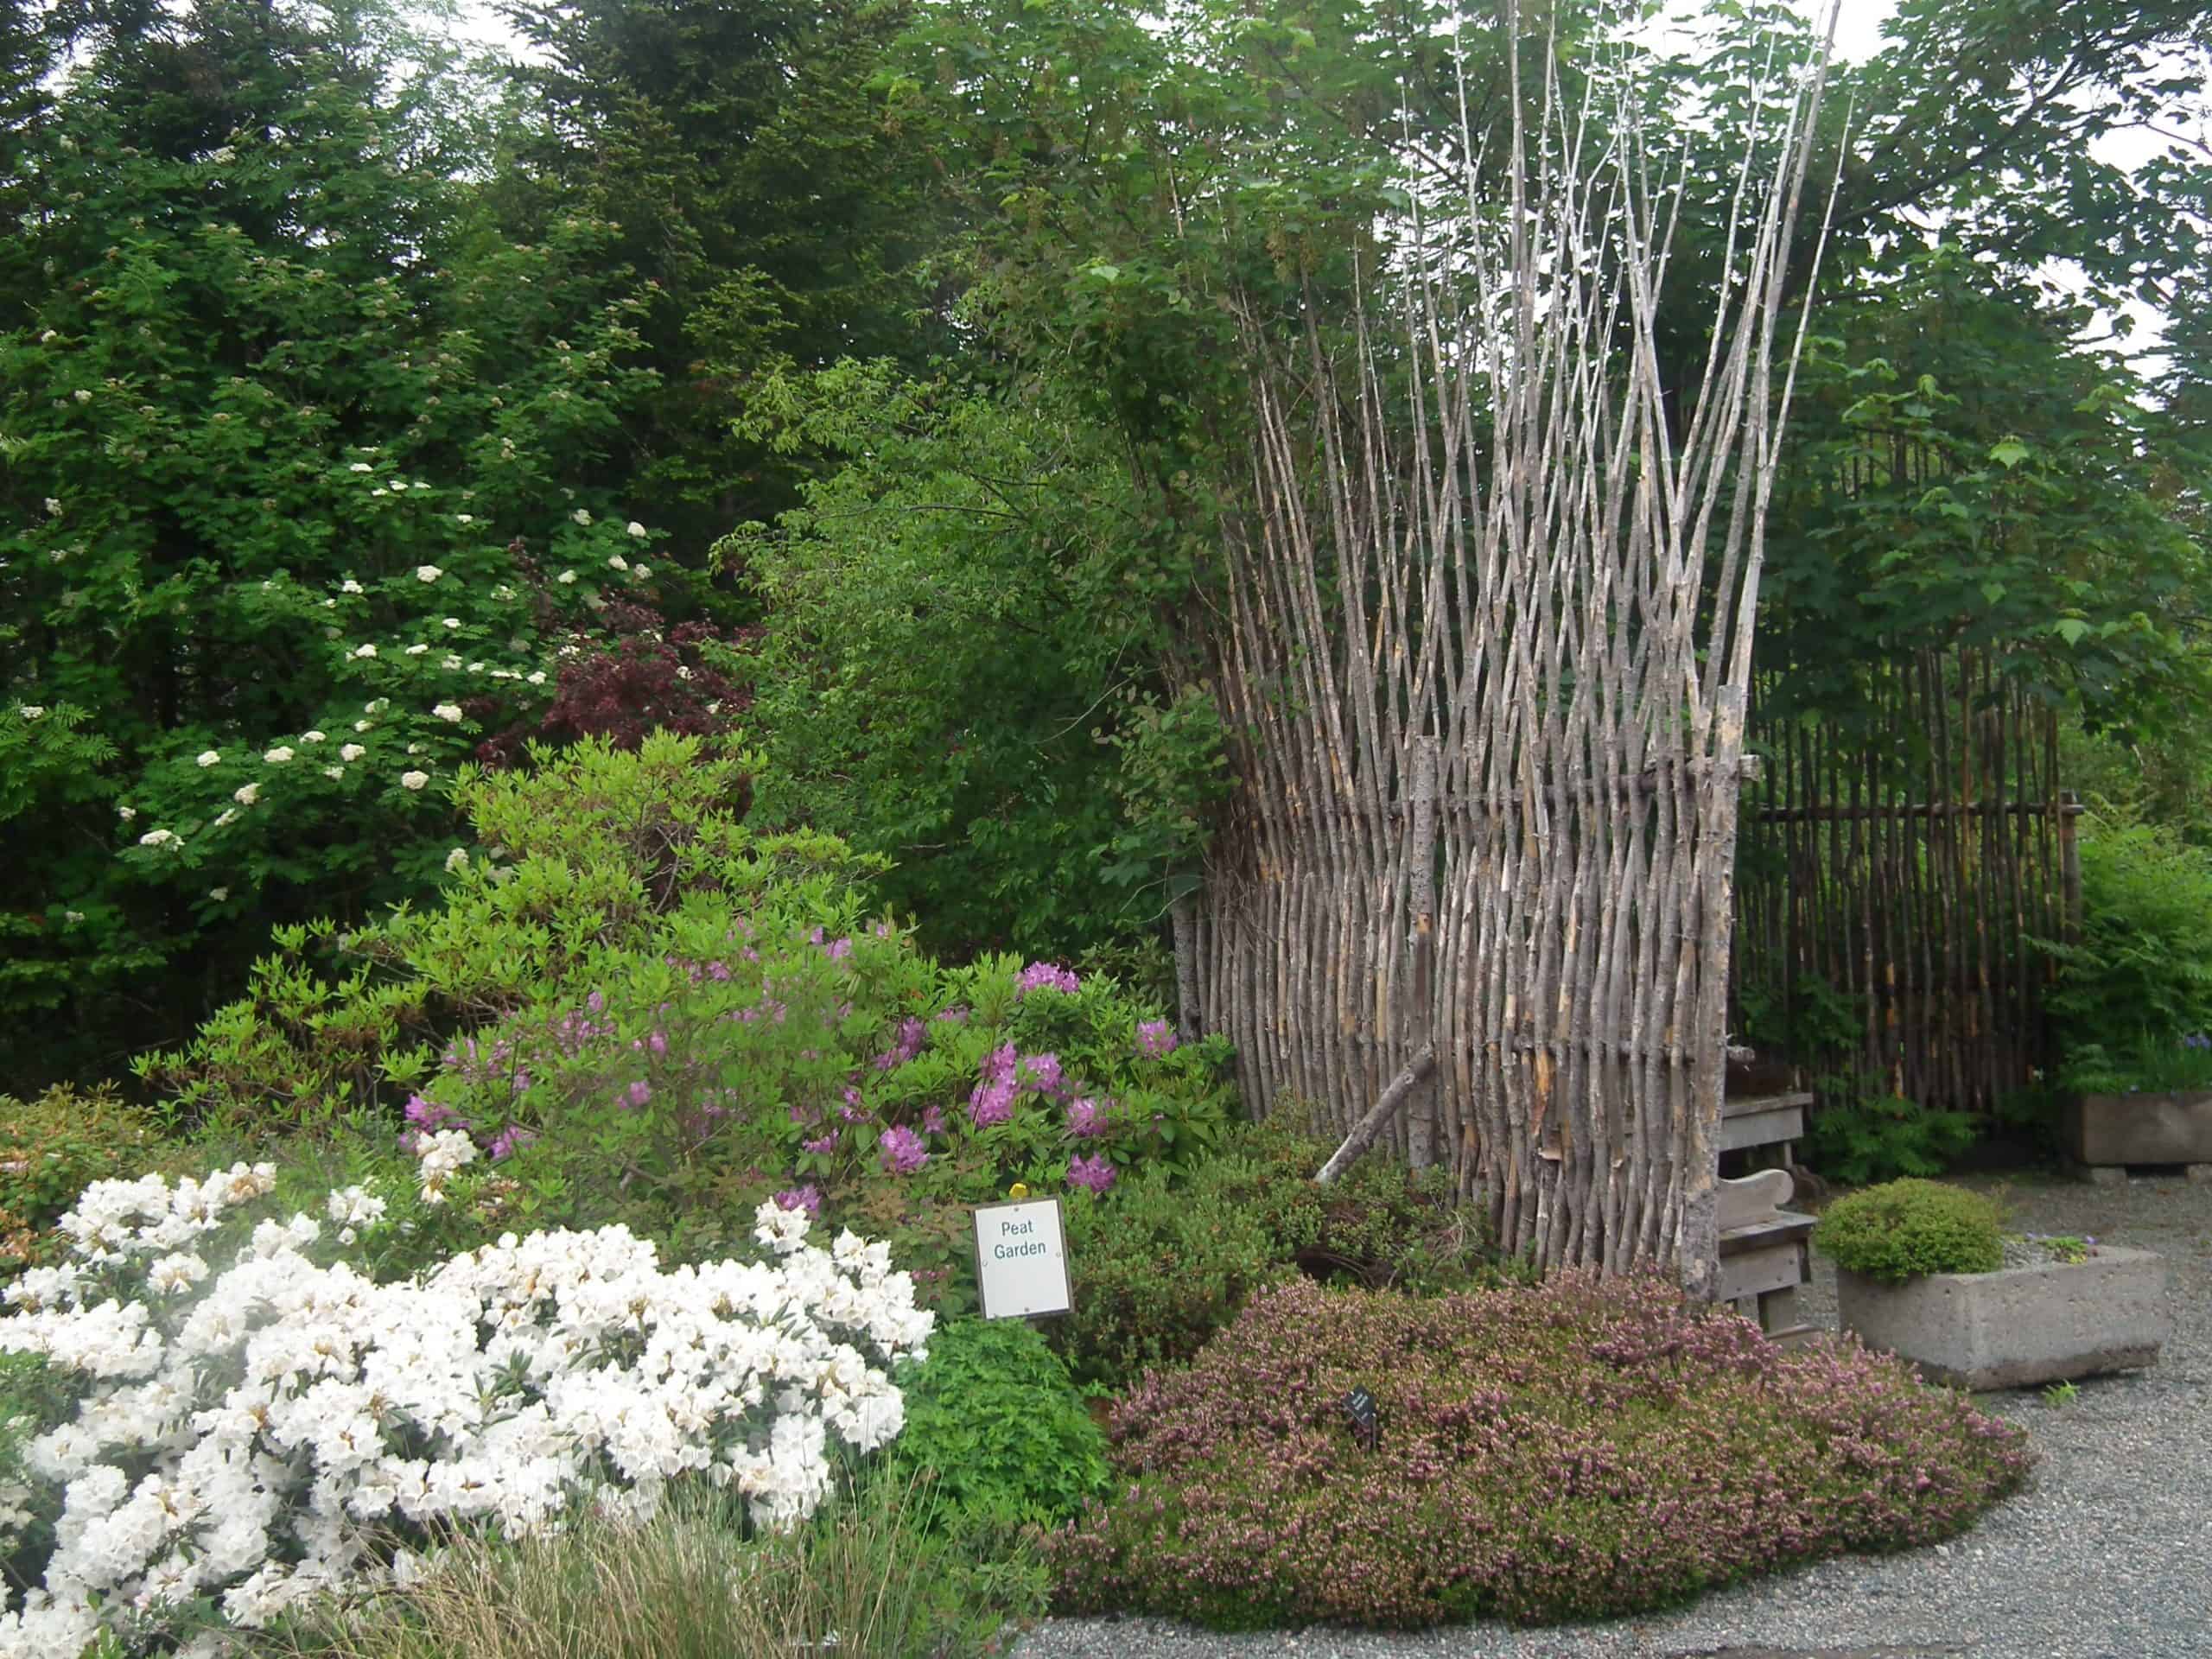 A Newfoundland "quiggly fence" protects the heritage garden.